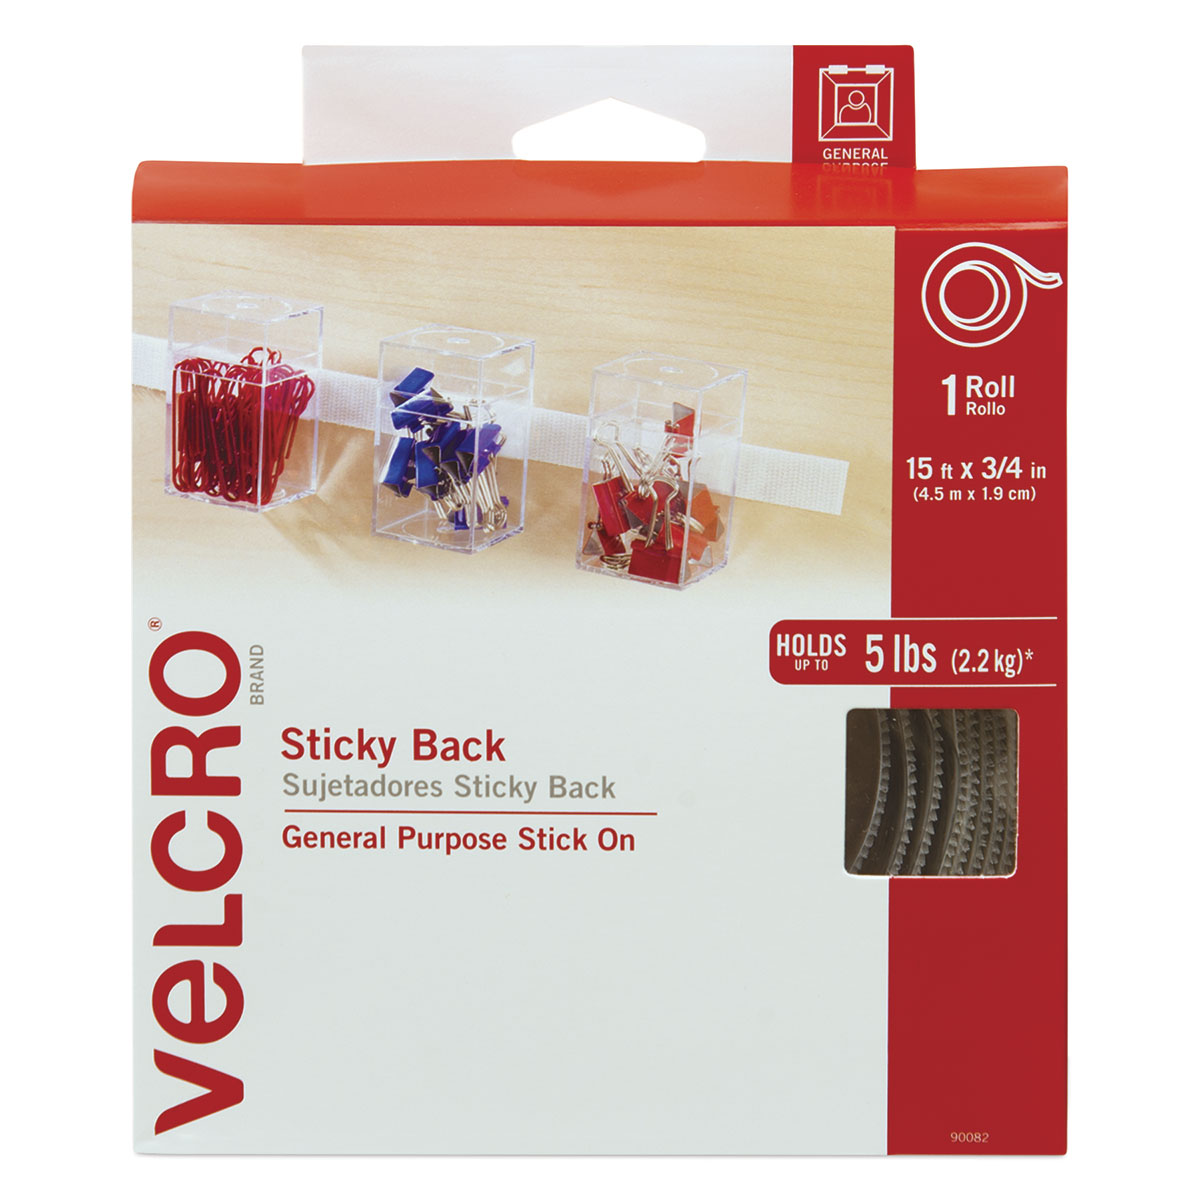 Velcro Sticky Back Fasteners - 3/4 x 50 ft, White, Roll